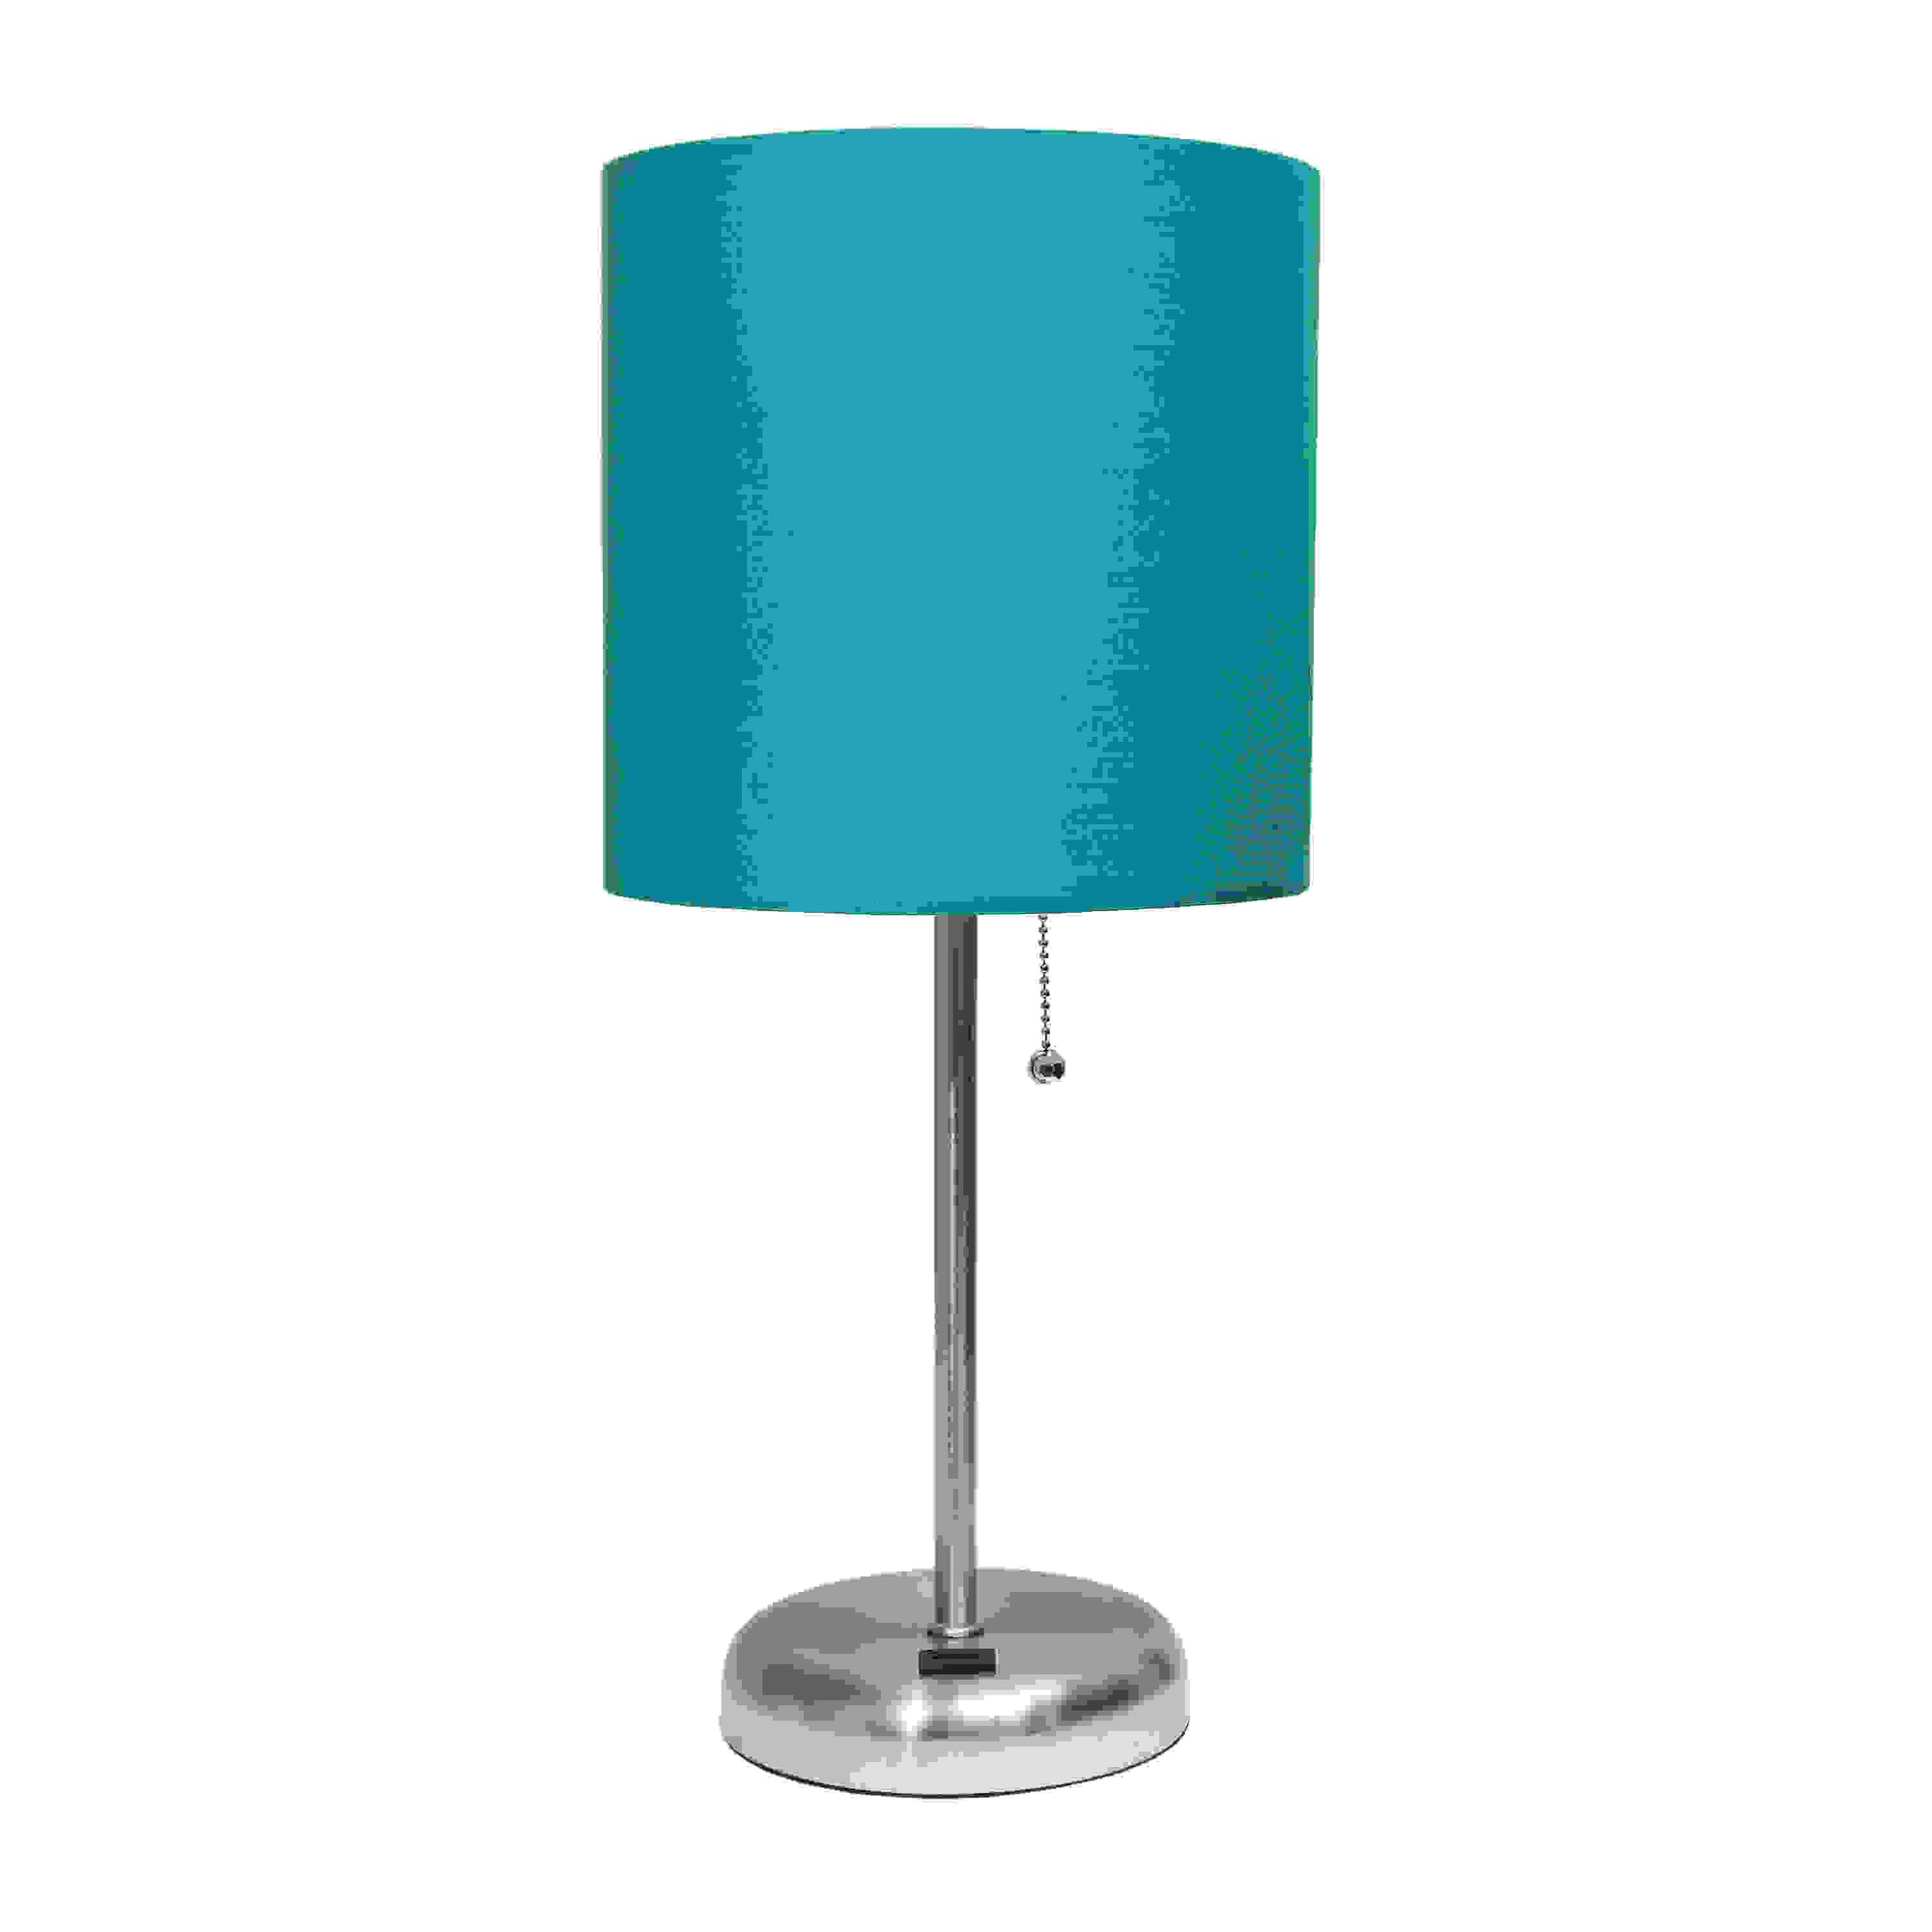 Simple Designs Stick Lamp with USB charging port and Fabric Shade, Teal